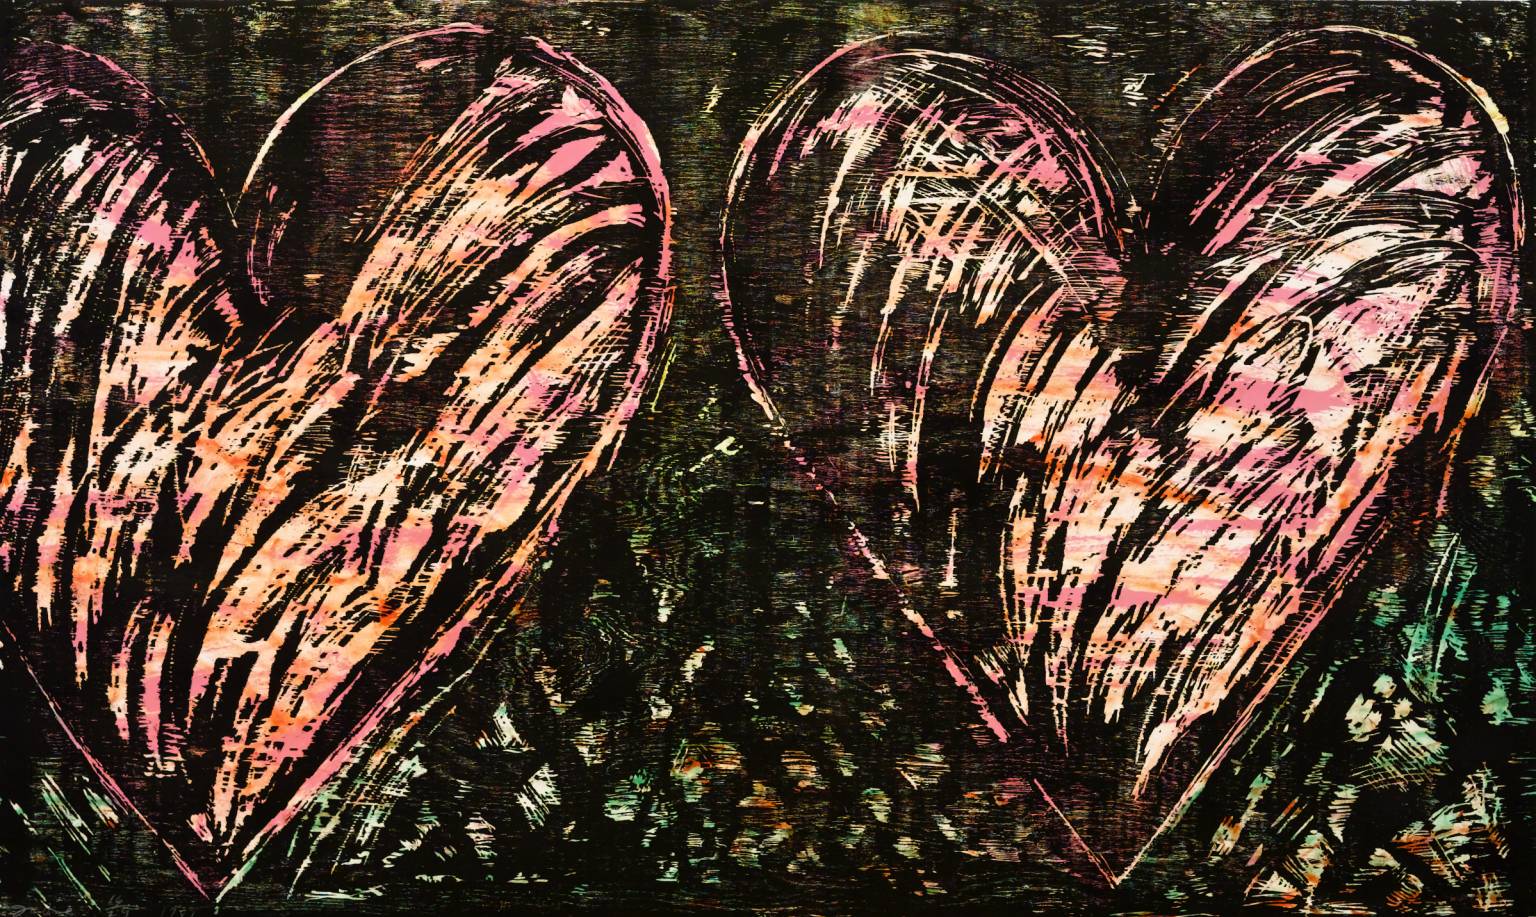 Two Hearts in a Forest 1981 by Jim Dine born 1935